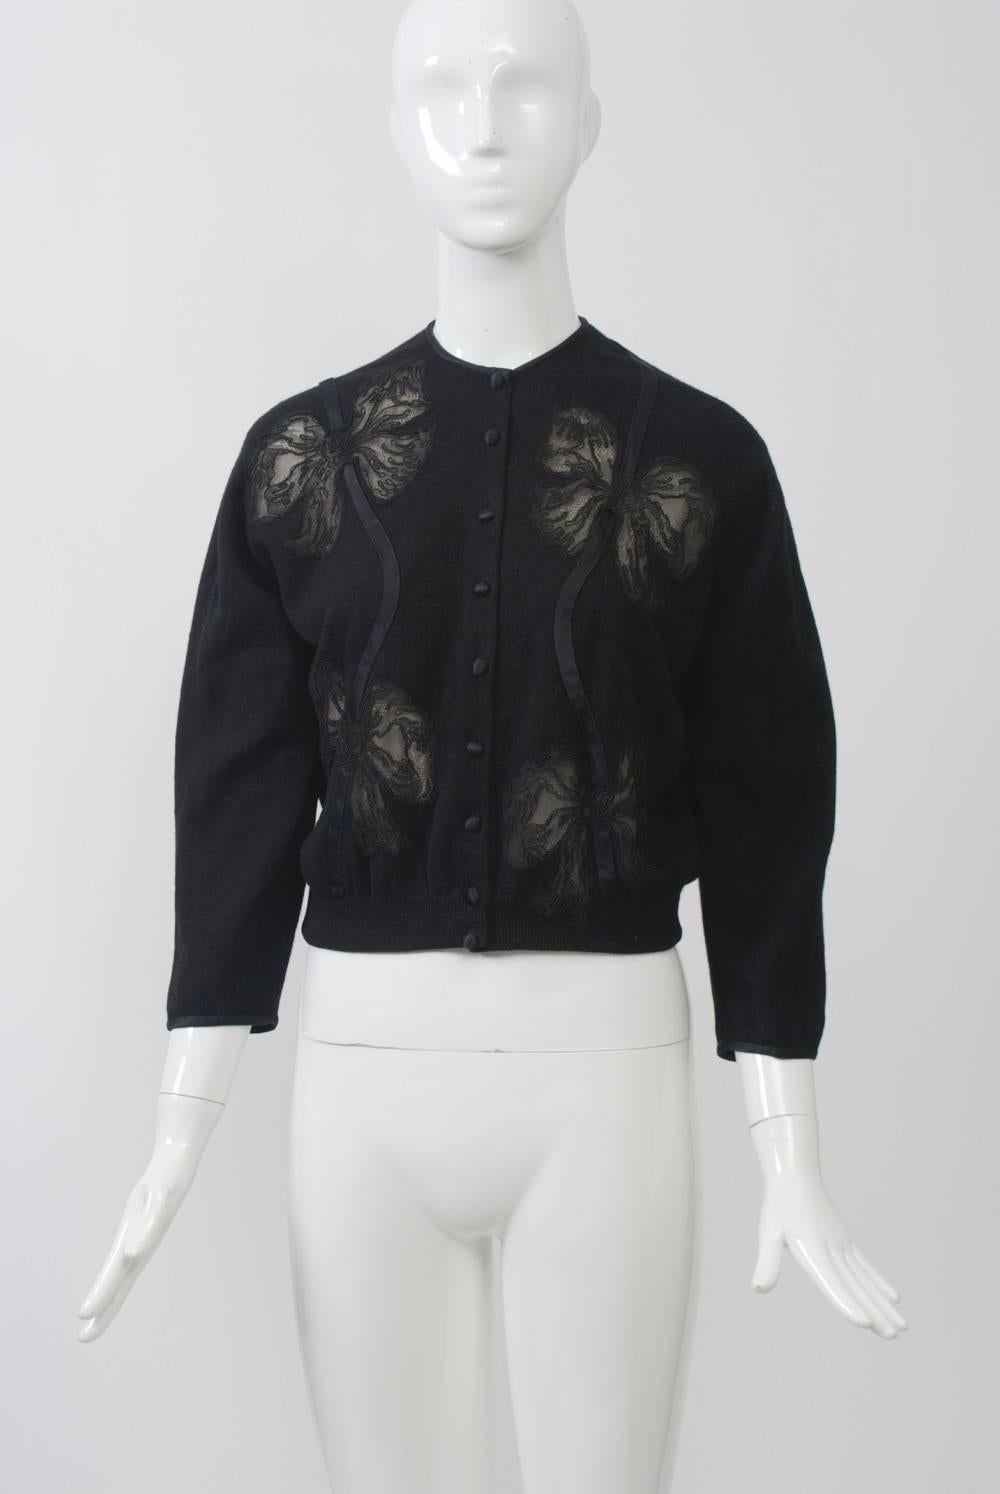 Some of the best vintage pieces from the 1950s-'60s are the decorated cardigans. This example, in black cashmere, has large illusion bow cutouts connected by ribbon on front and a single bow at the left back. The short cardigan has black satin